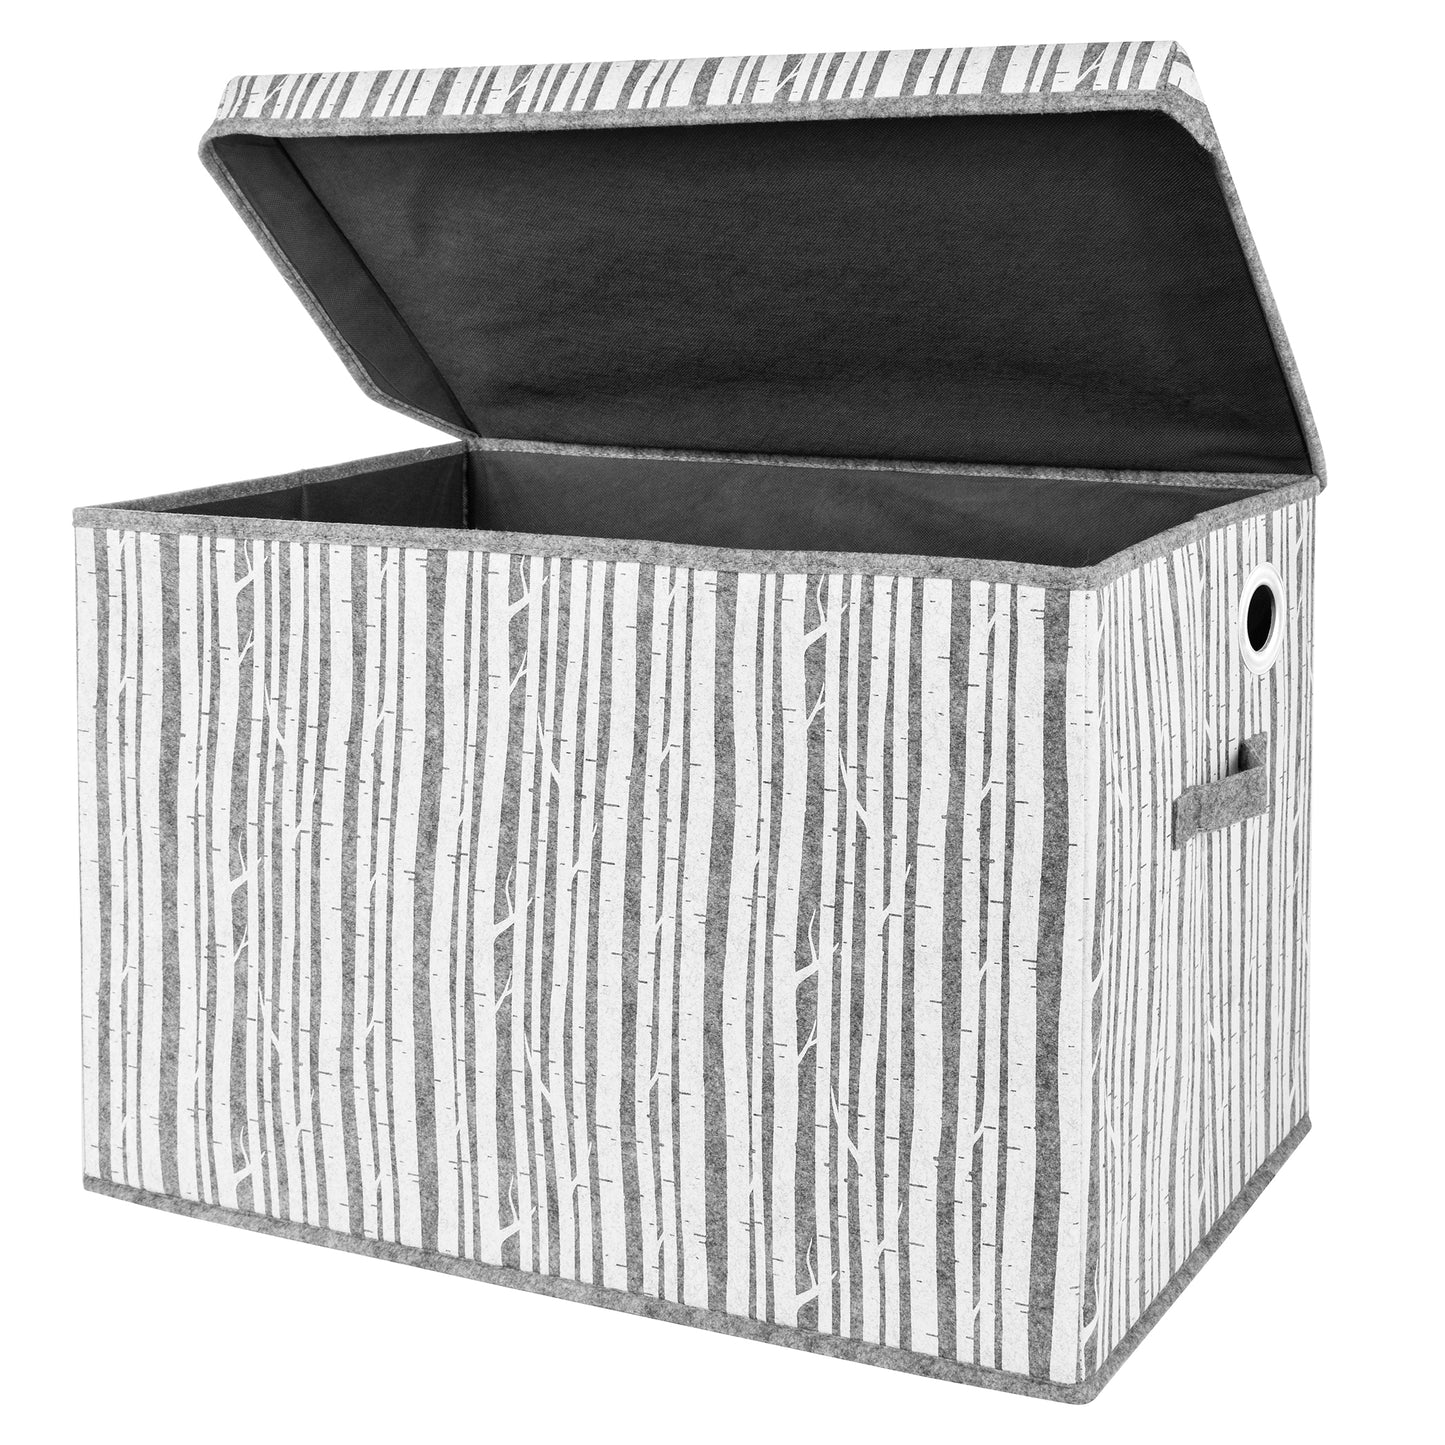 Birch Felt Toy Box by Sammy & Lou® Angled with lid open